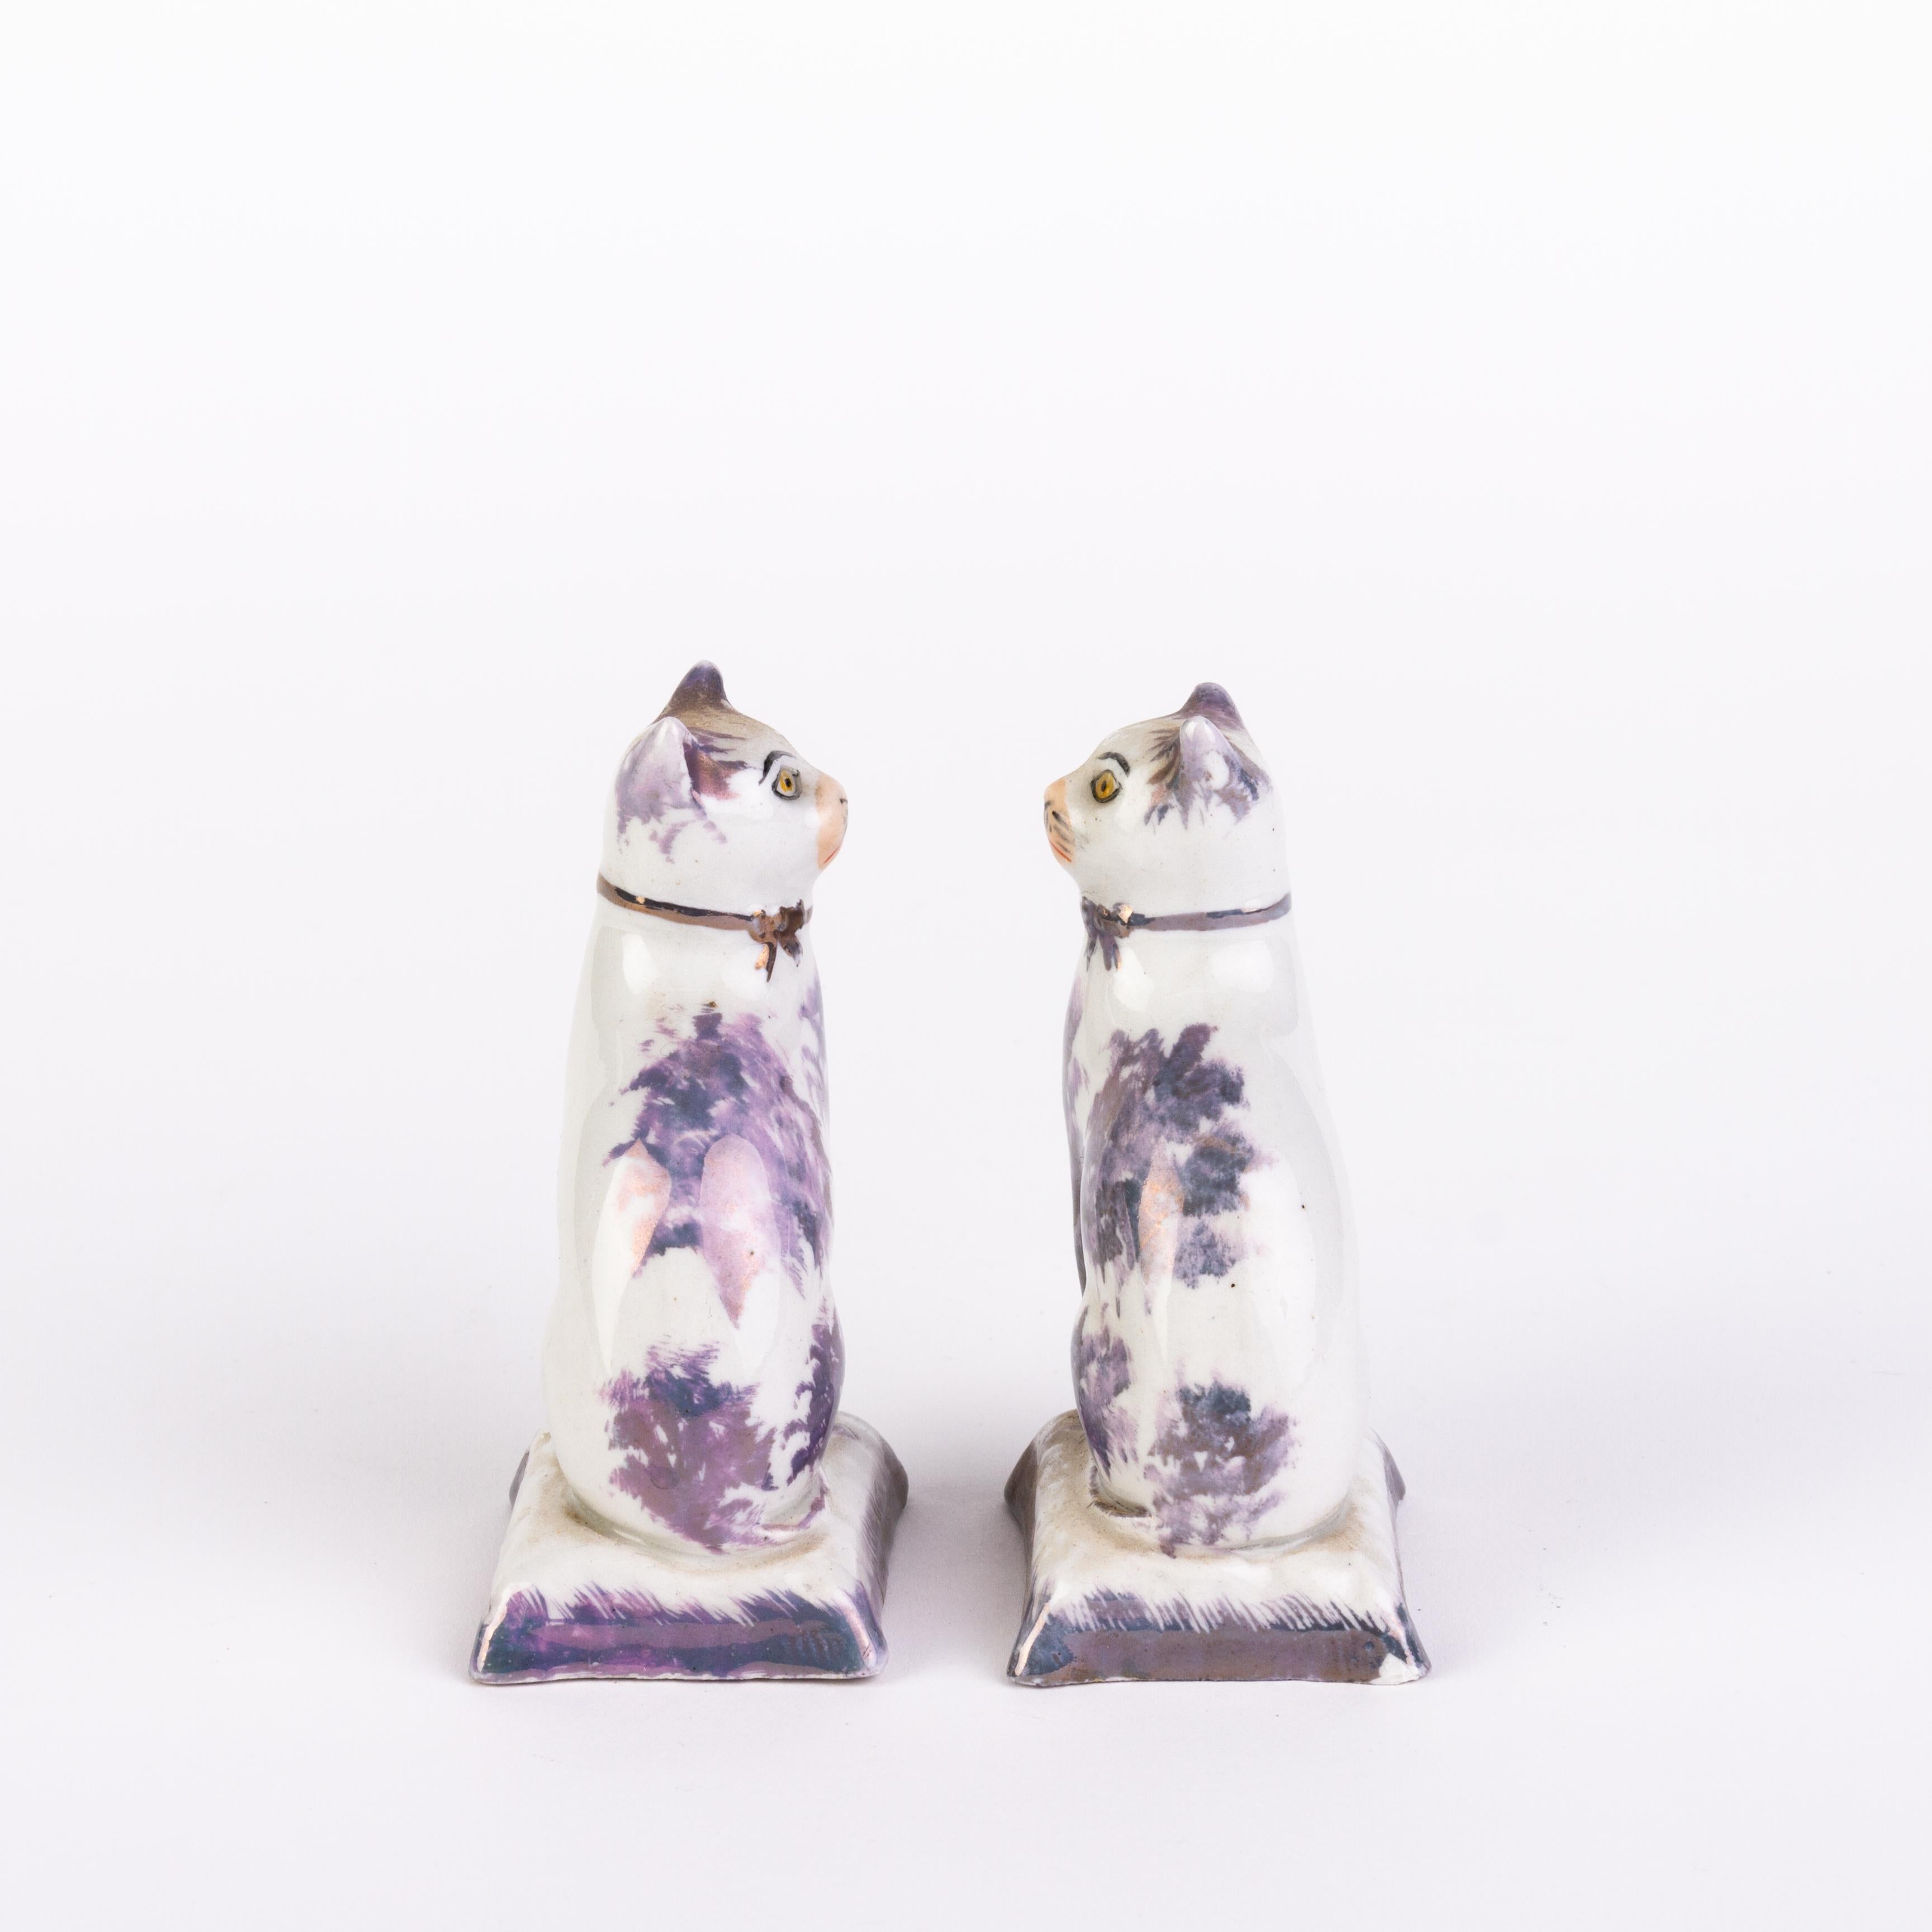 Victorian English Pair of Polychrome Staffordshire Pottery Cats 19th Century
Good condition 
From a private collection.
Free international shipping.